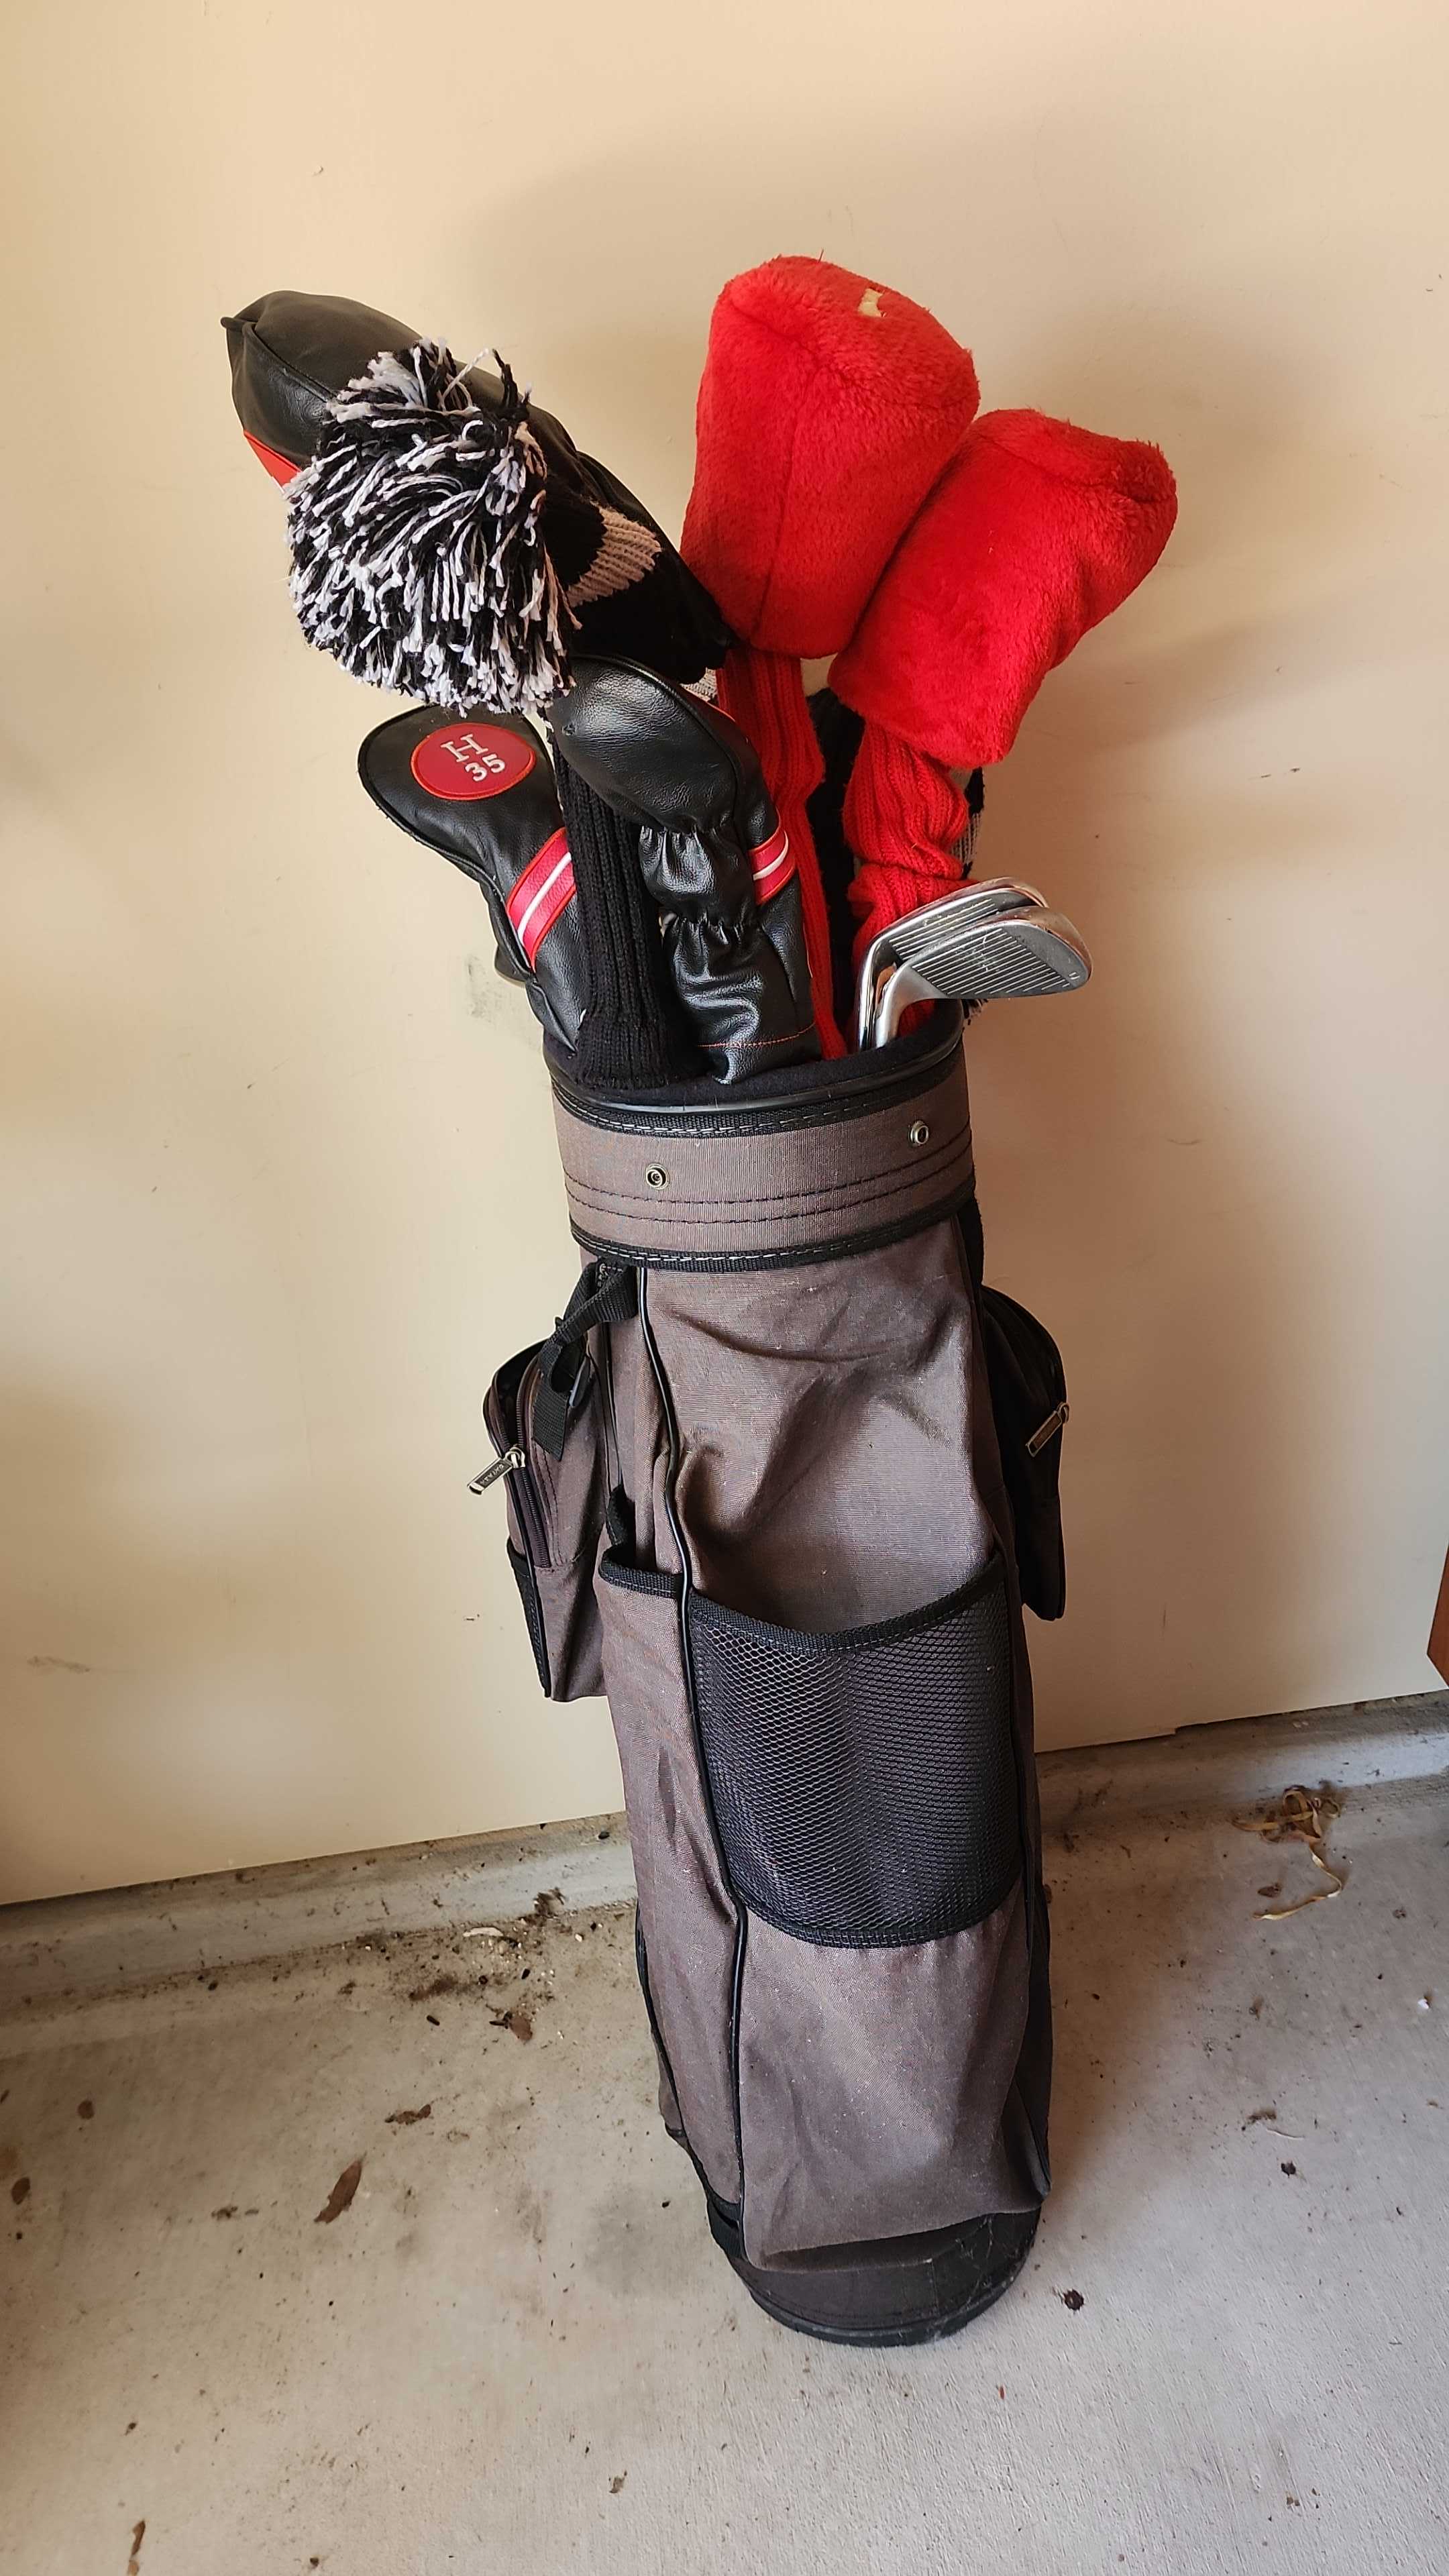 Best Vintage Leather Golf Bag And Clubs for sale in Huntersville, North  Carolina for 2023